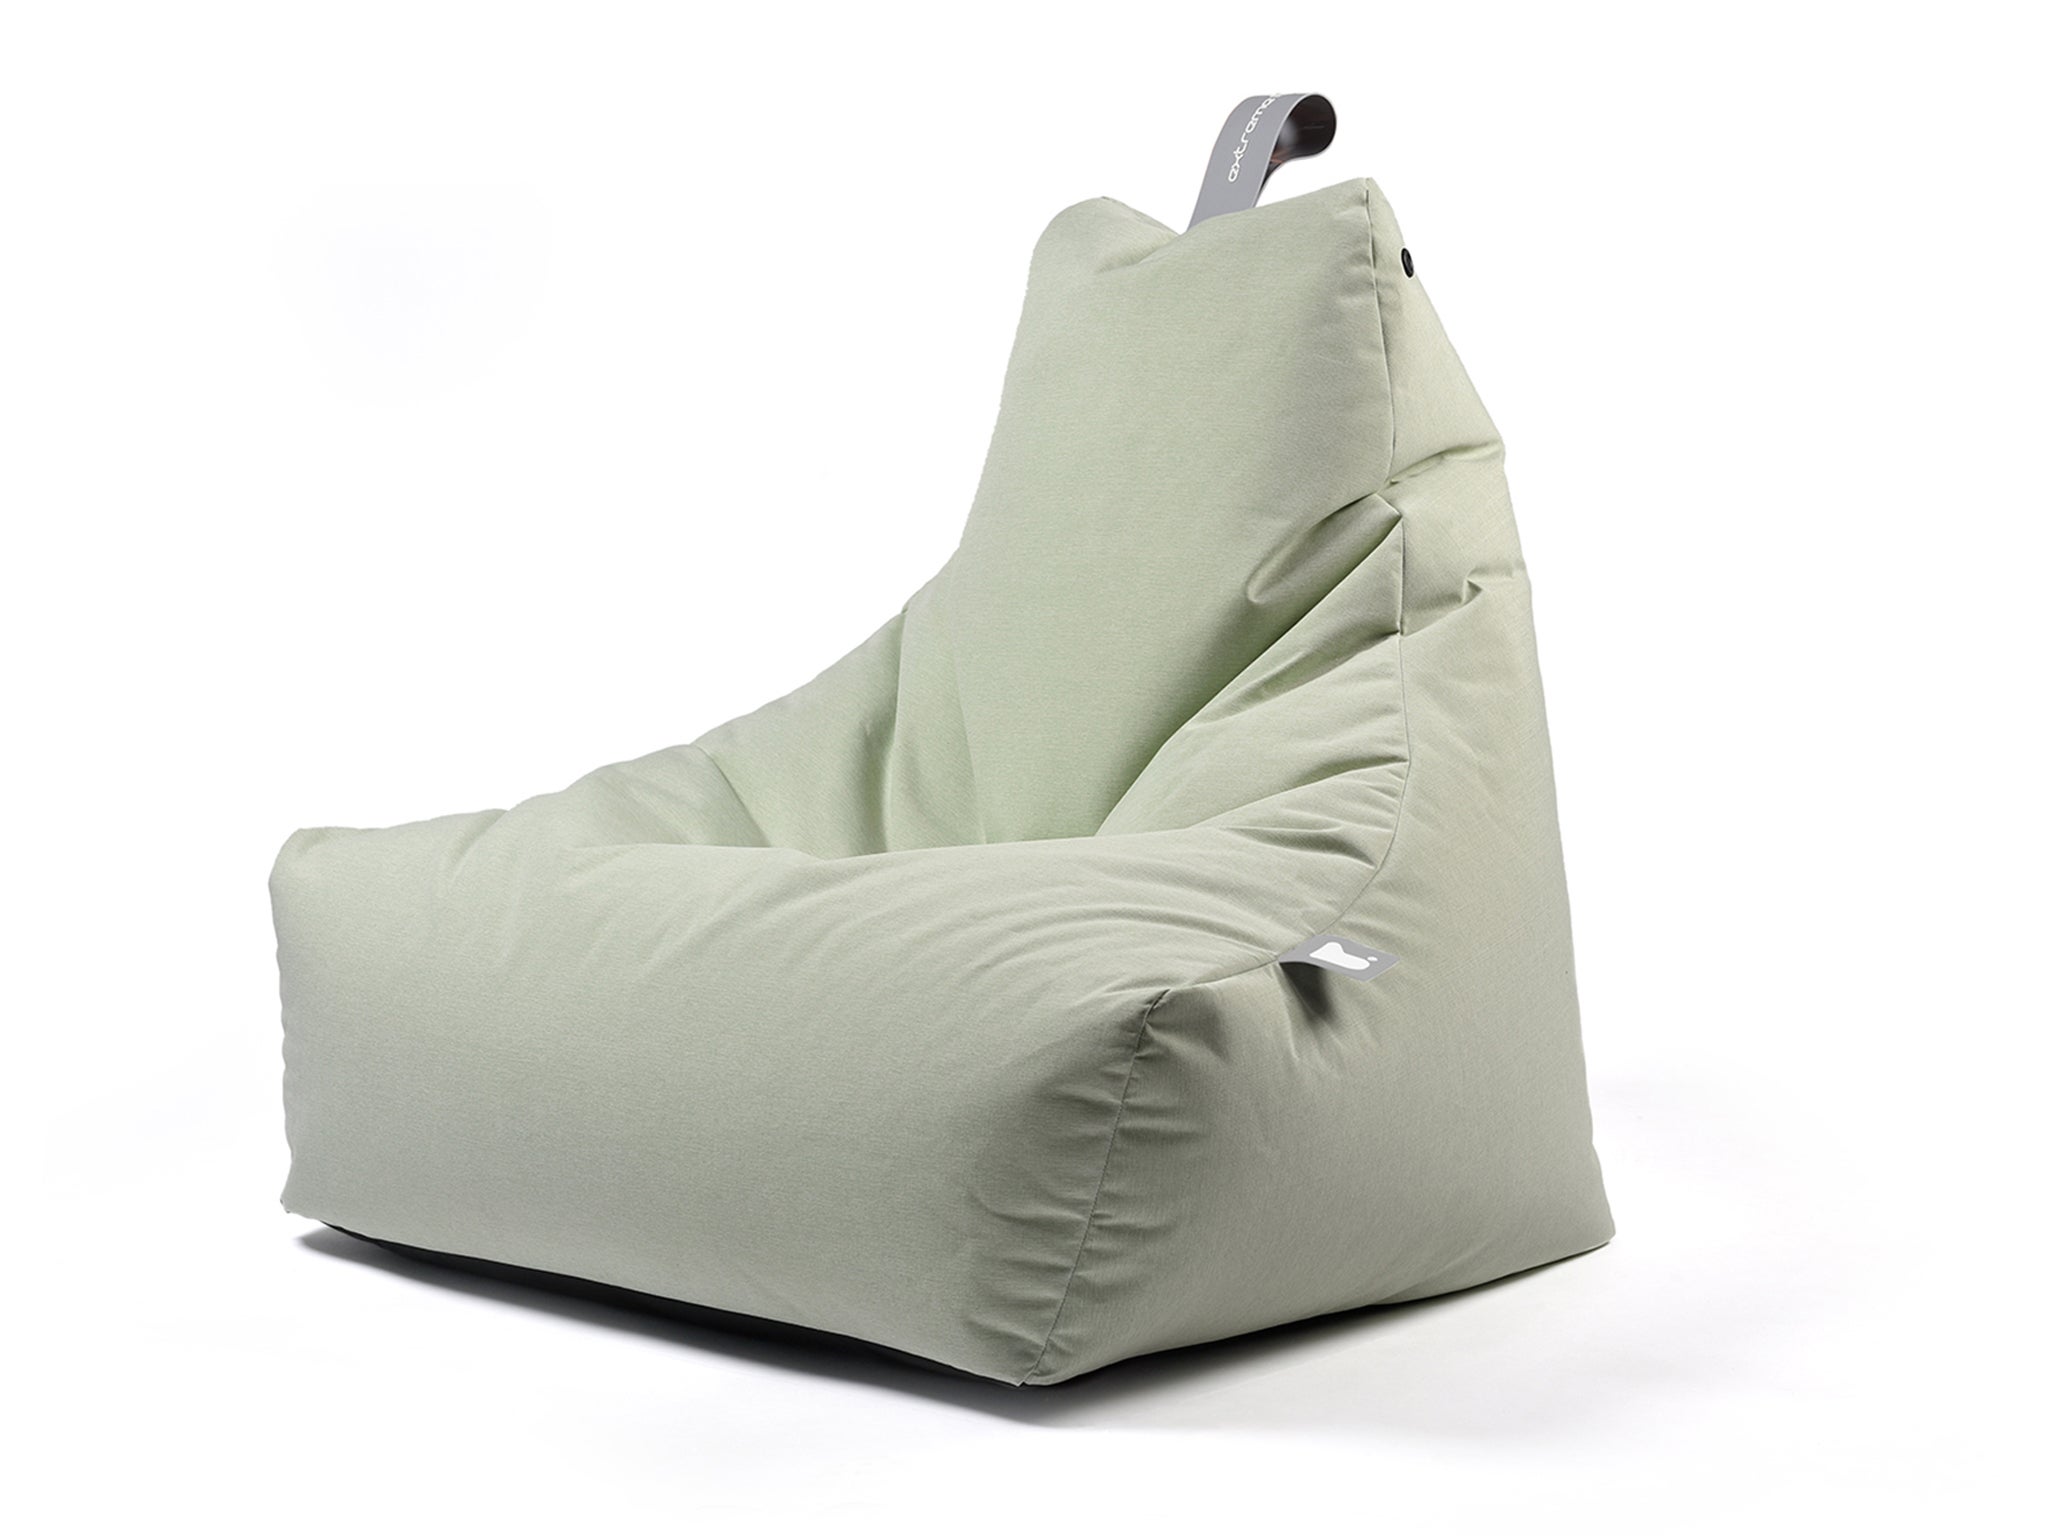 Buy Comfy Large Solid Bean Bag Chair Online | Centrepoint KSA